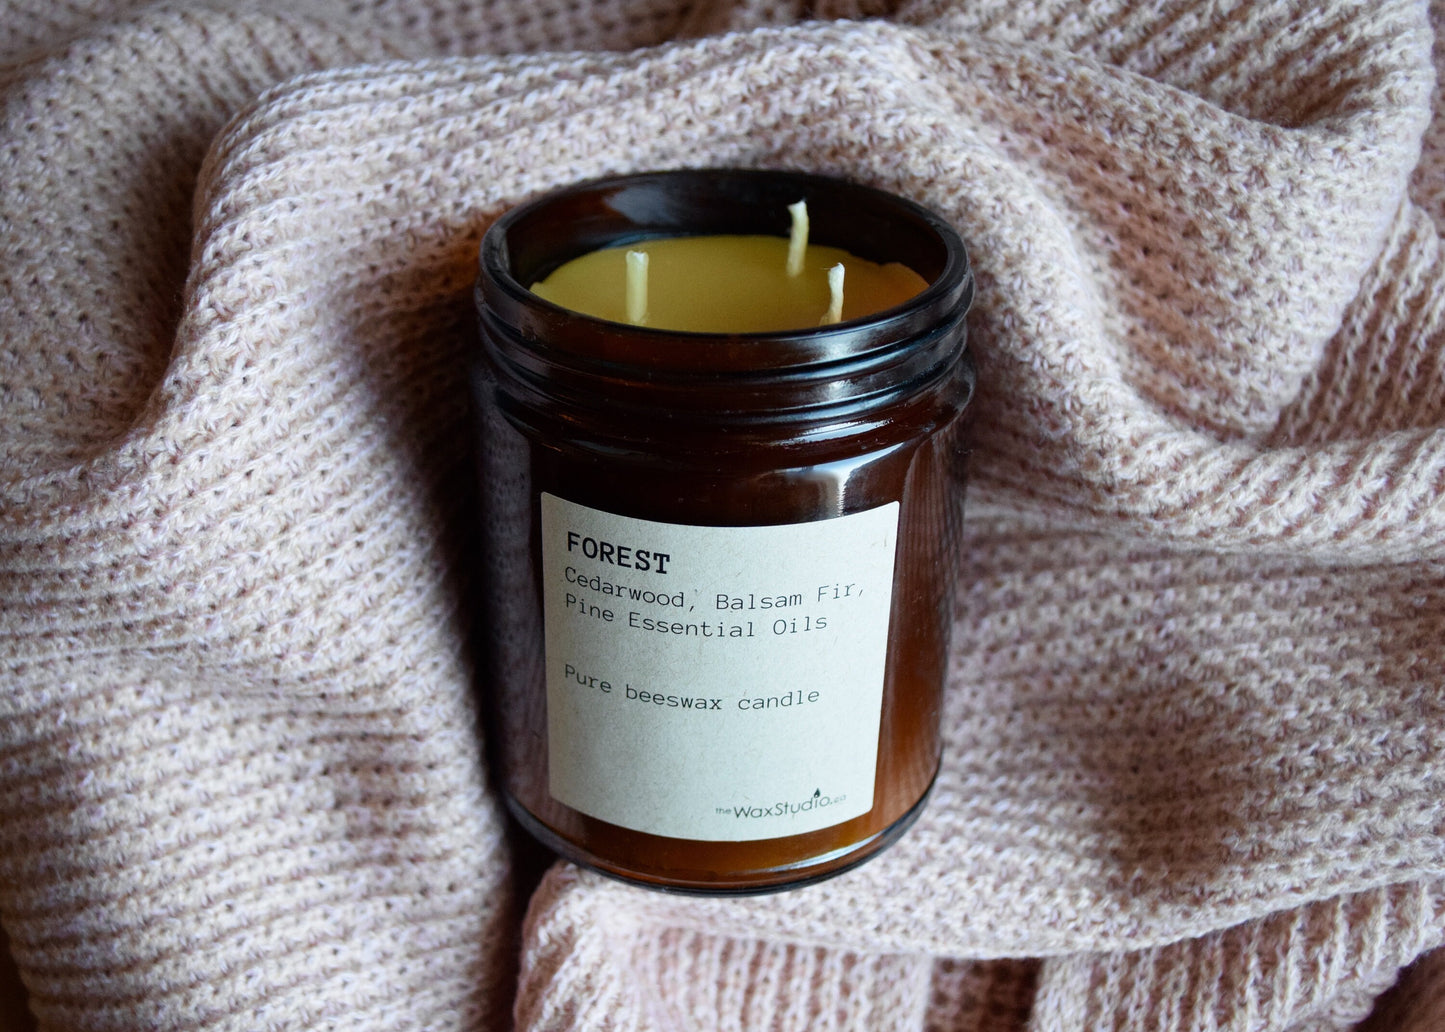 Aromatherapy Beeswax Jar Candle - FOREST - Triple Wick // Woodland Aroma - Beeswax Candle - Amber Glass Jar Candle - 50 hour burn time